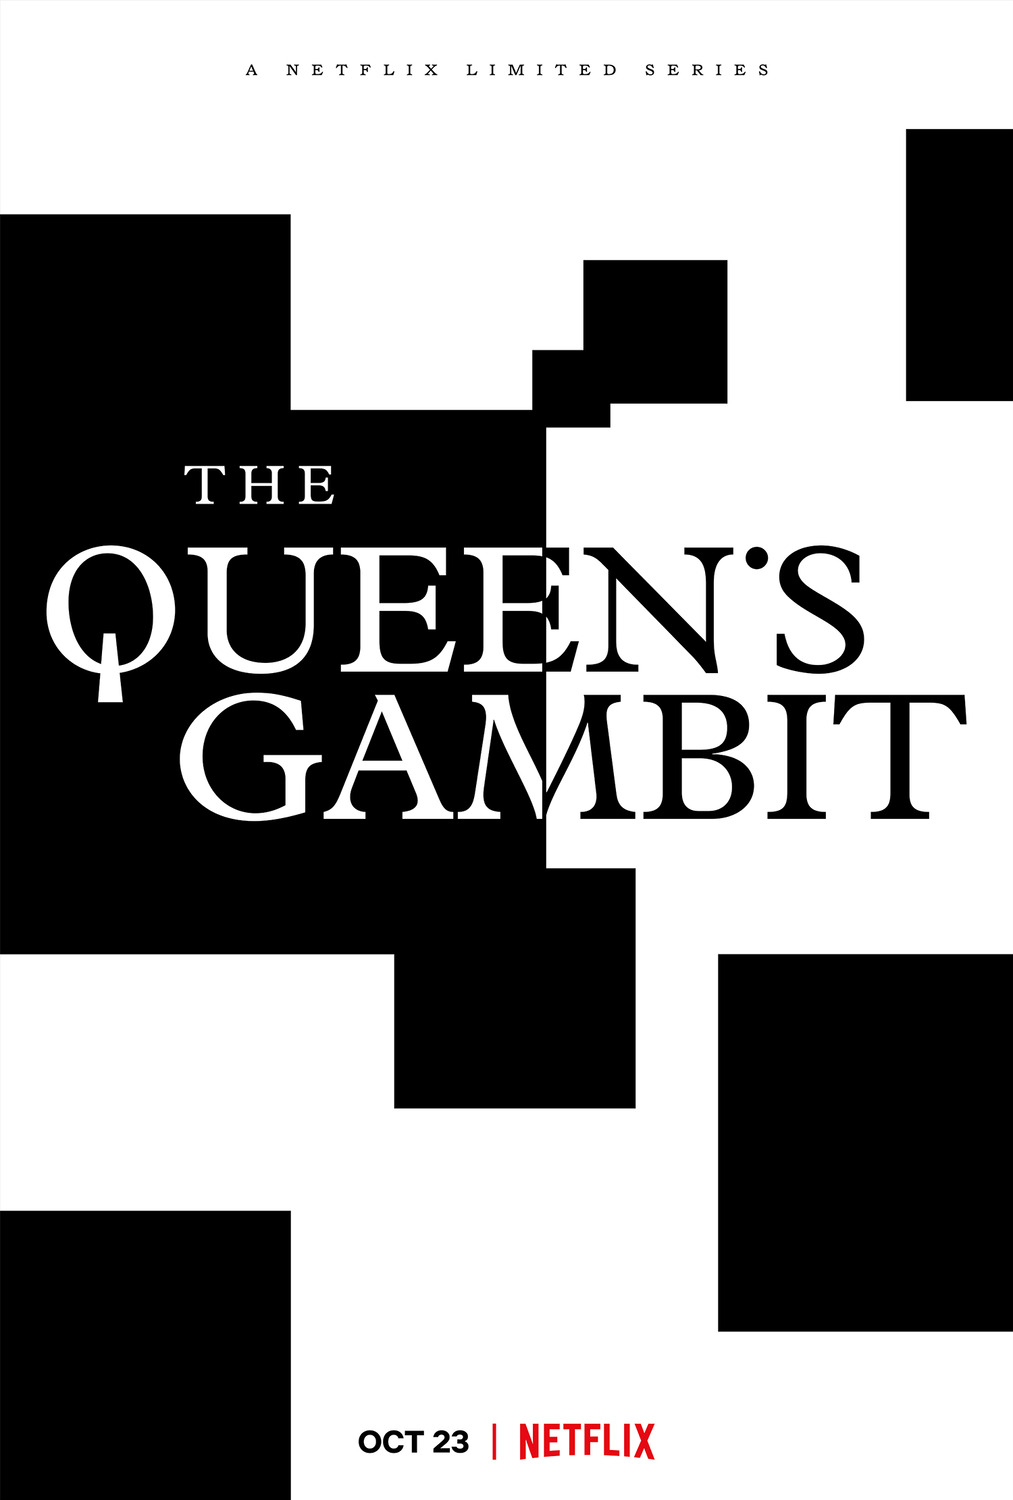 Extra Large TV Poster Image for The Queen's Gambit (#5 of 7)